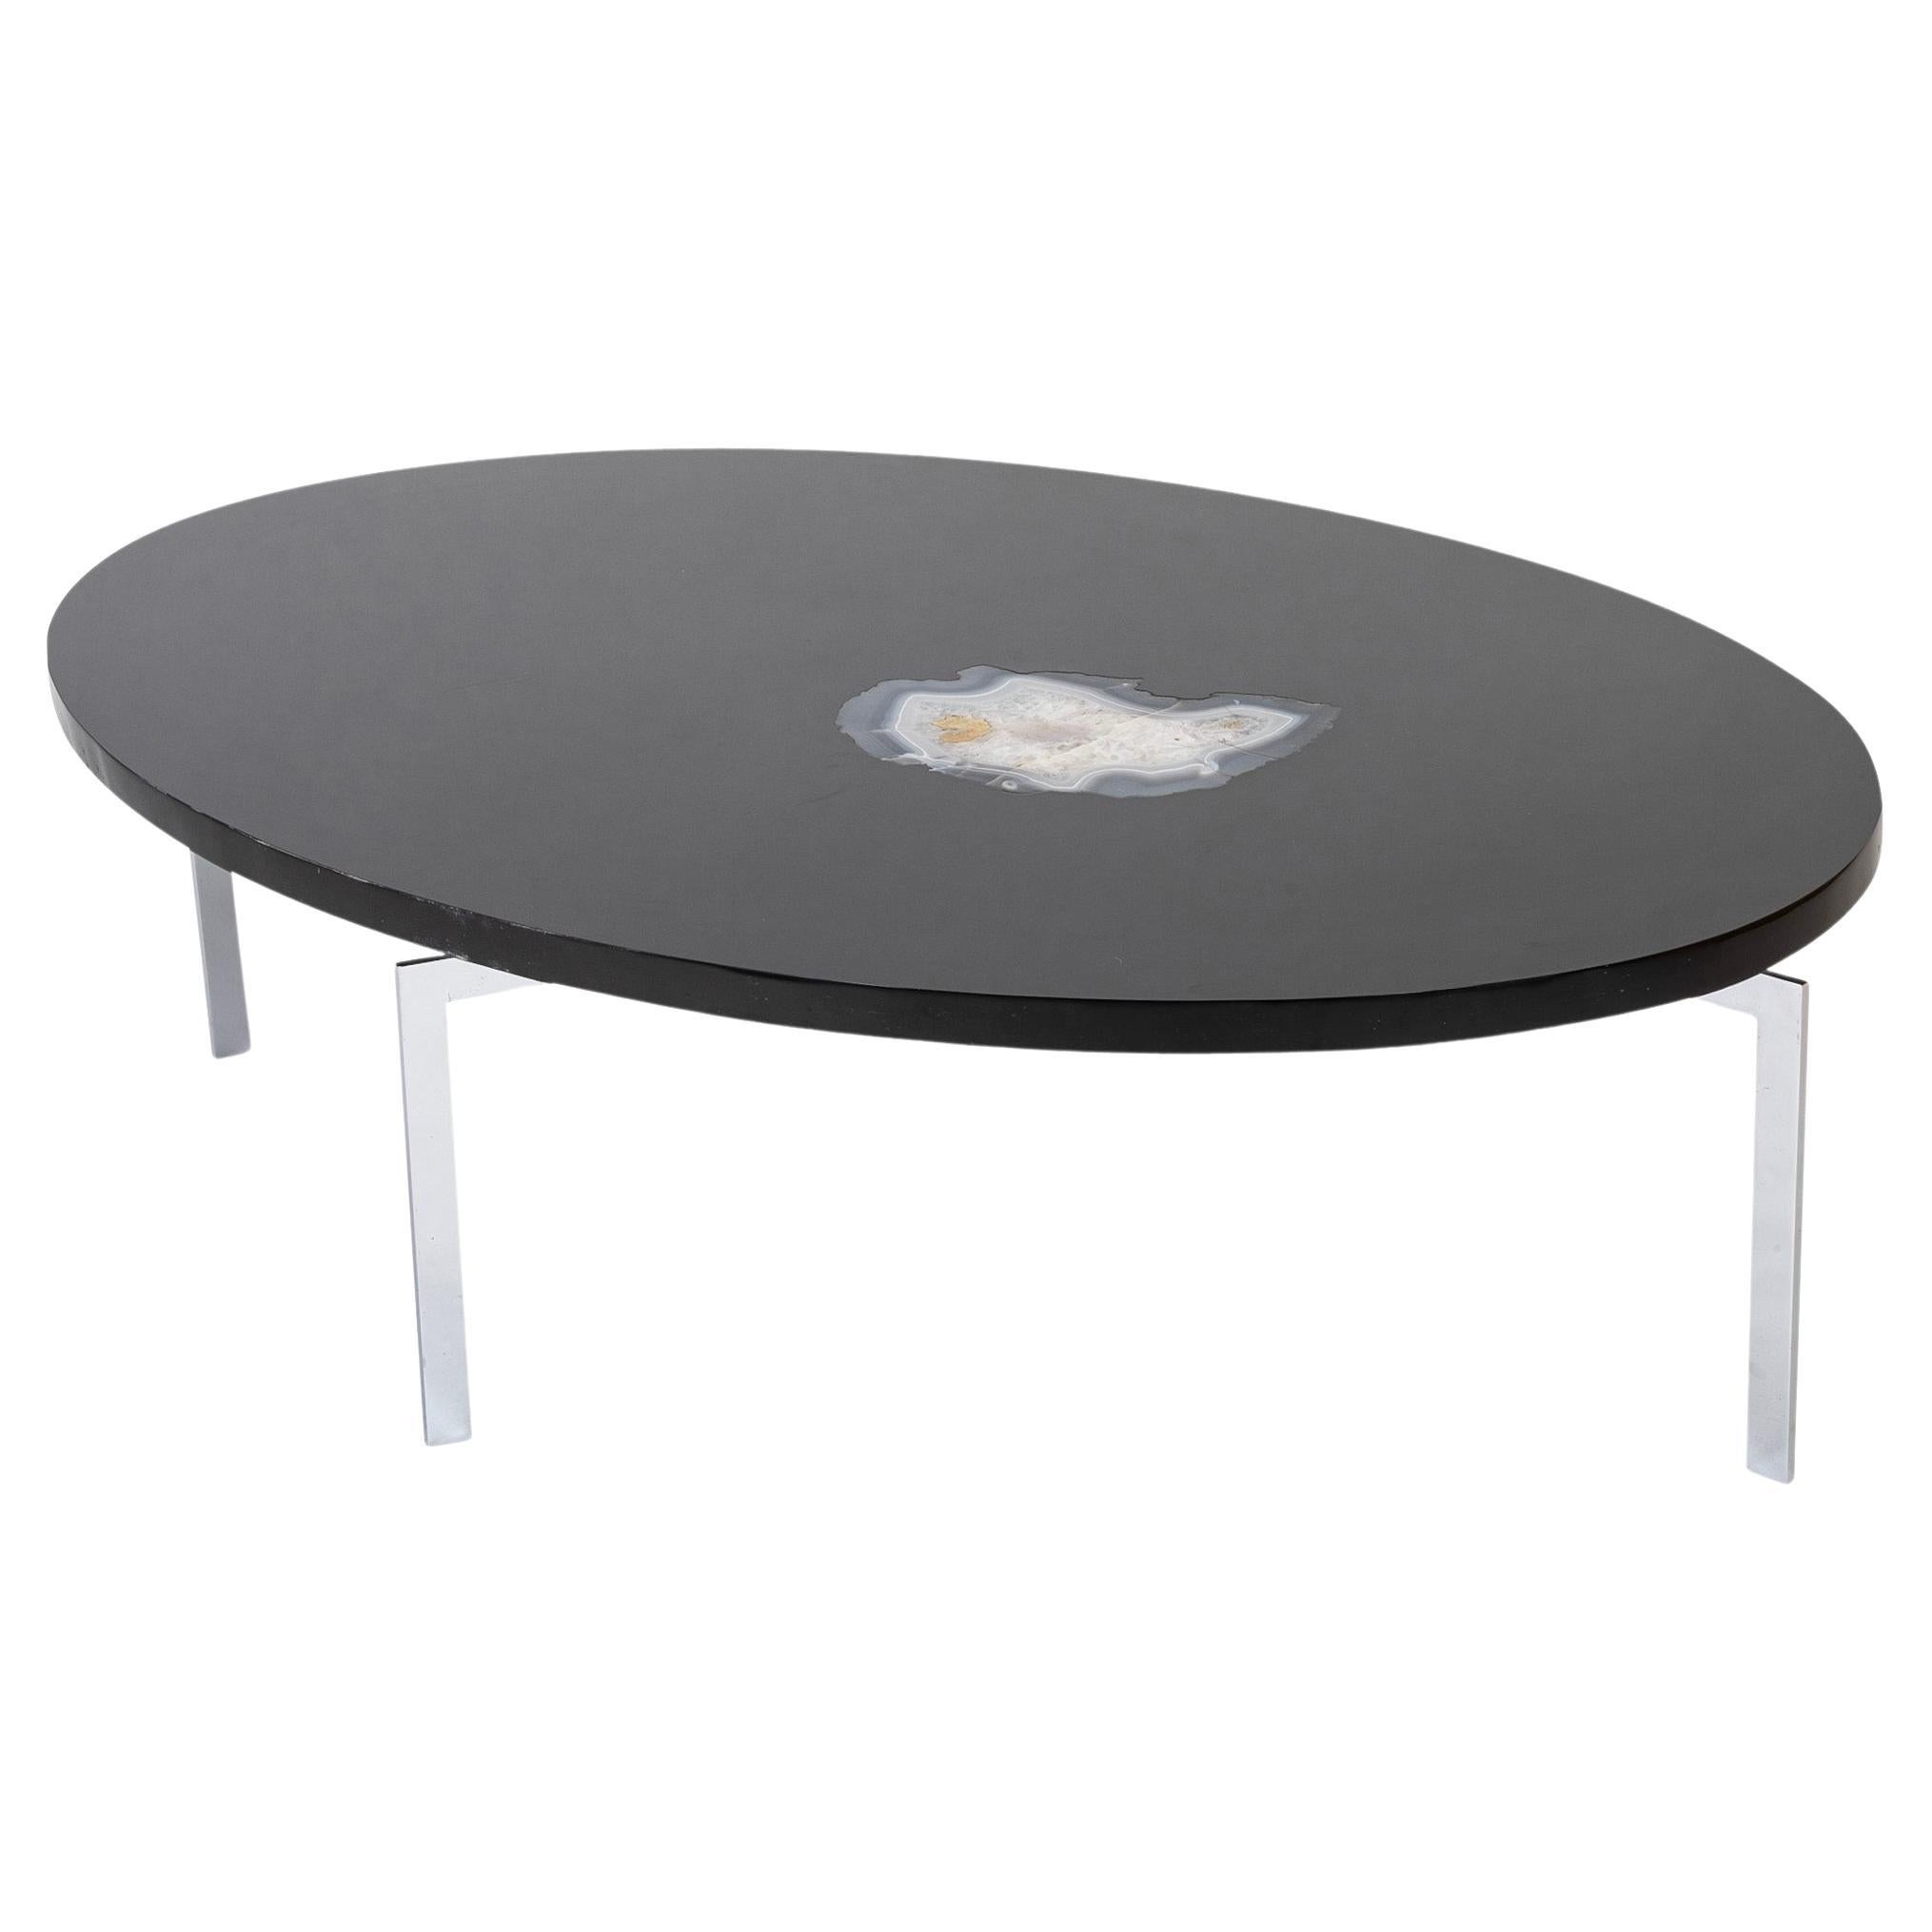 Philippe Barbier Oval Black Resin Coffee Table with Agate Insert For Sale